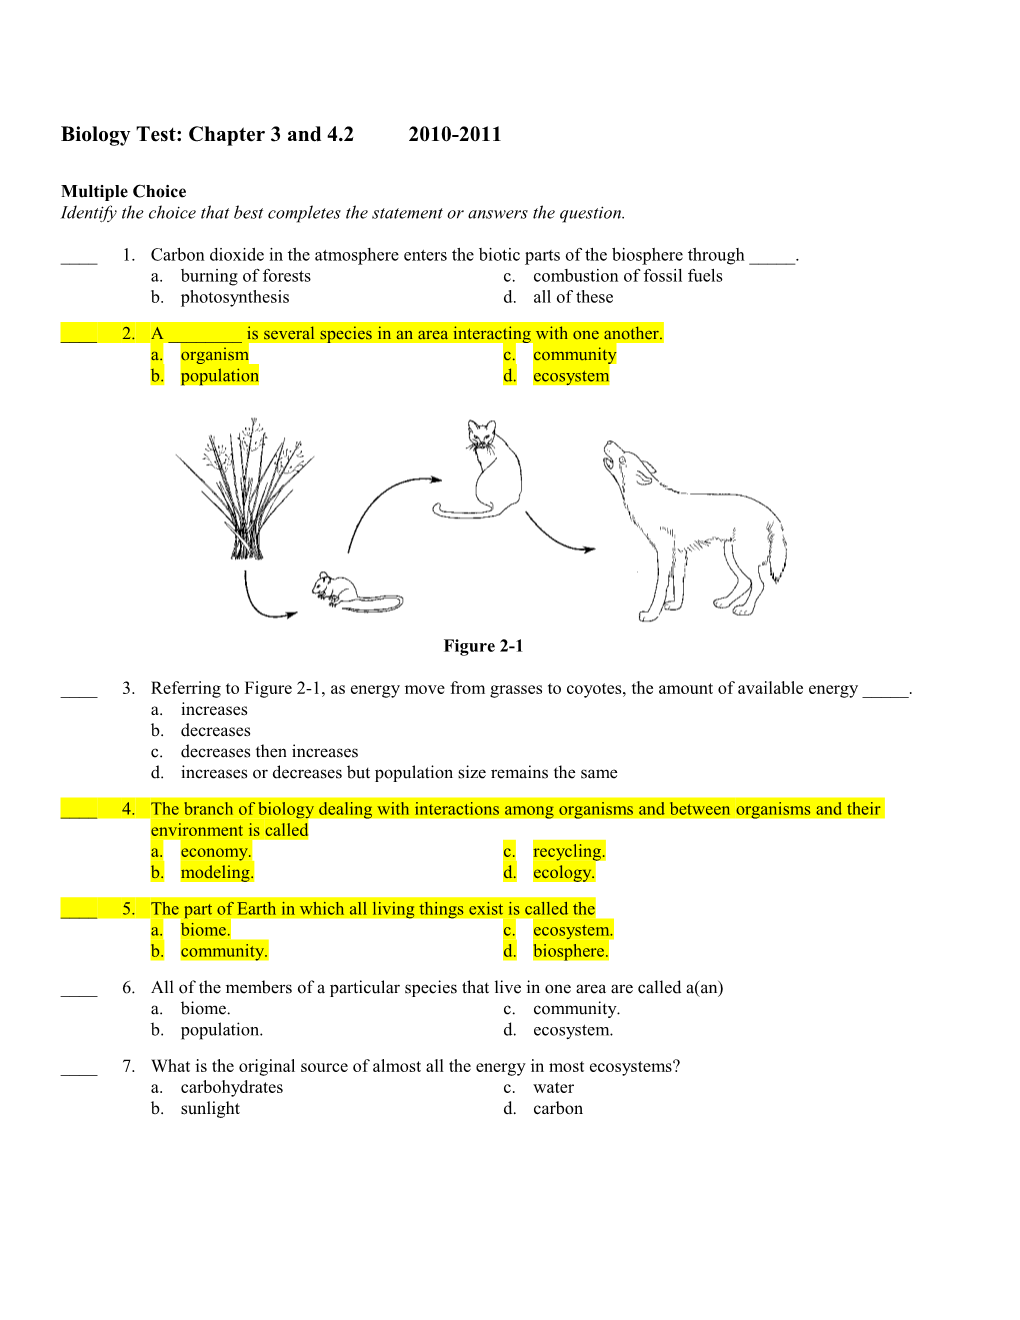 Biology Test: Chapter 3 and 4.2 2010-2011